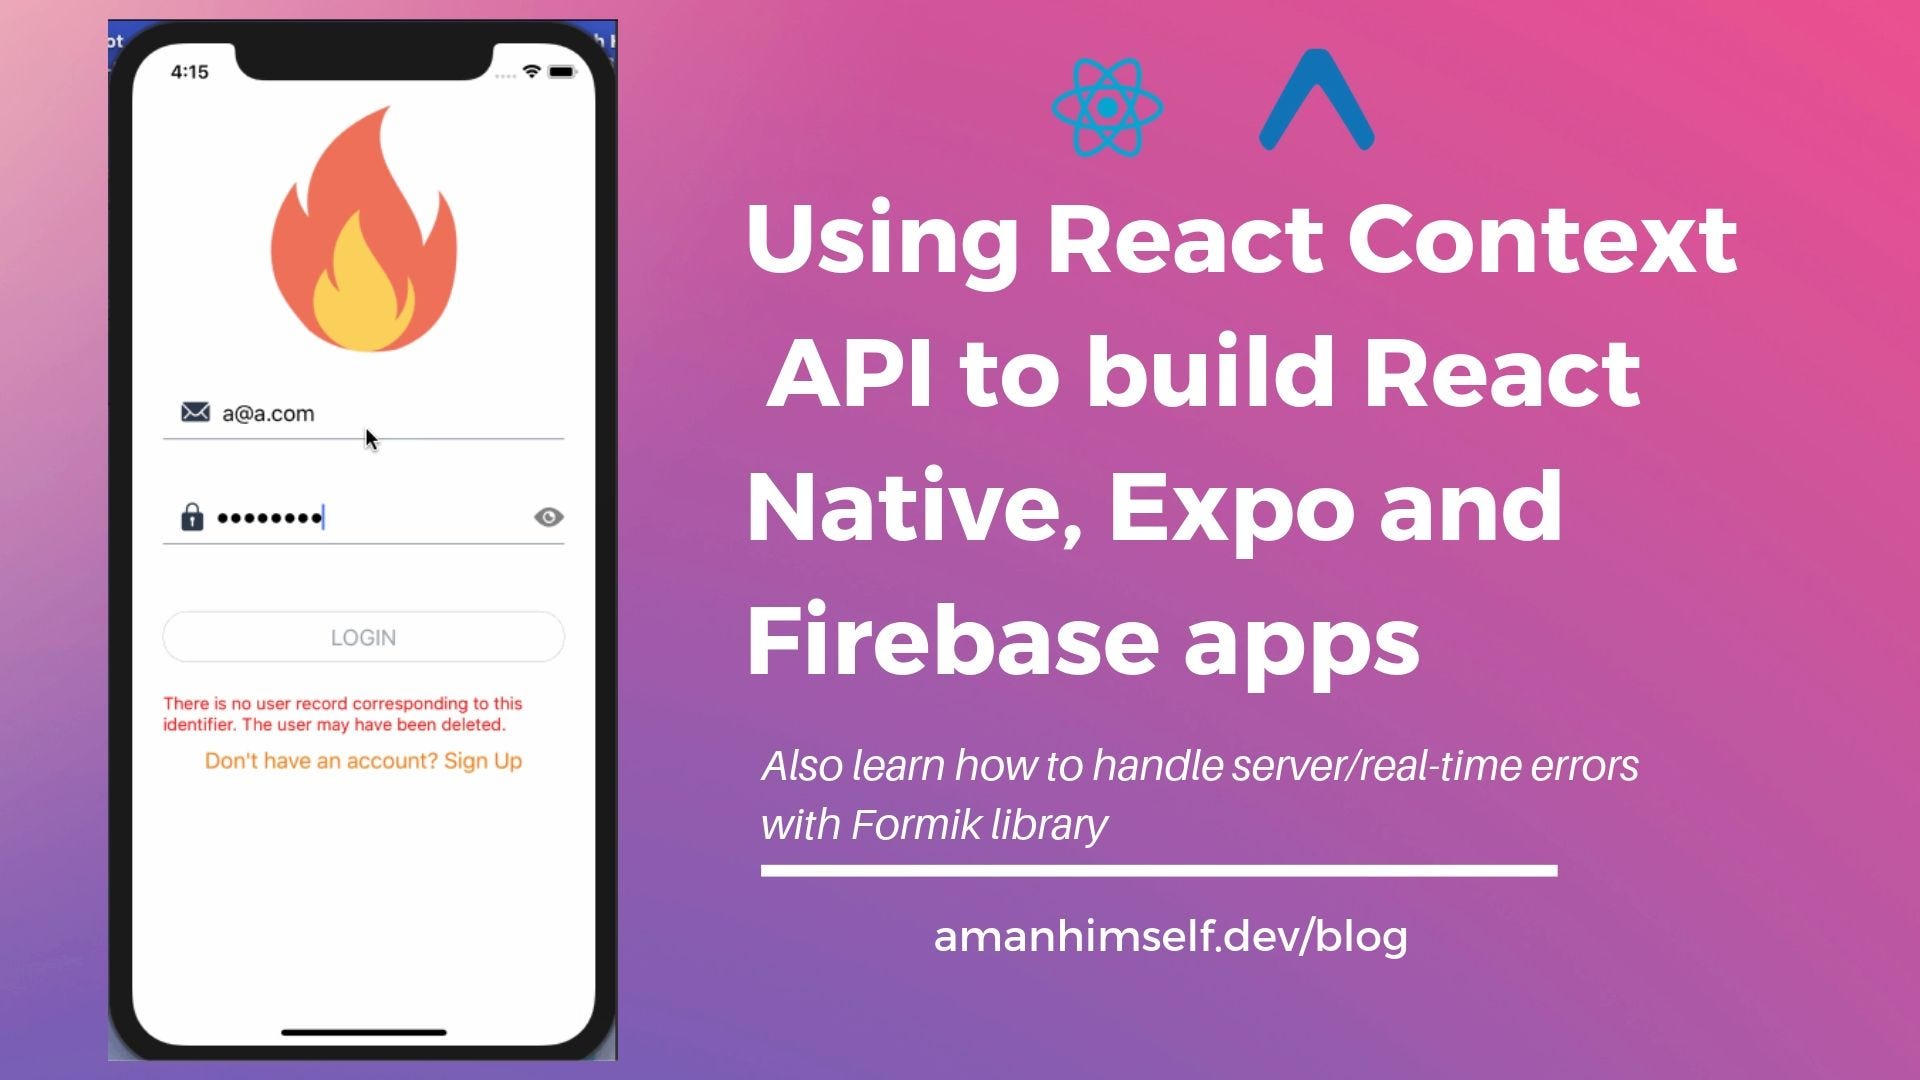 How To Use The React Context Api To Build React Native Expo And Firebase Apps By Aman Mittal Level Up Coding